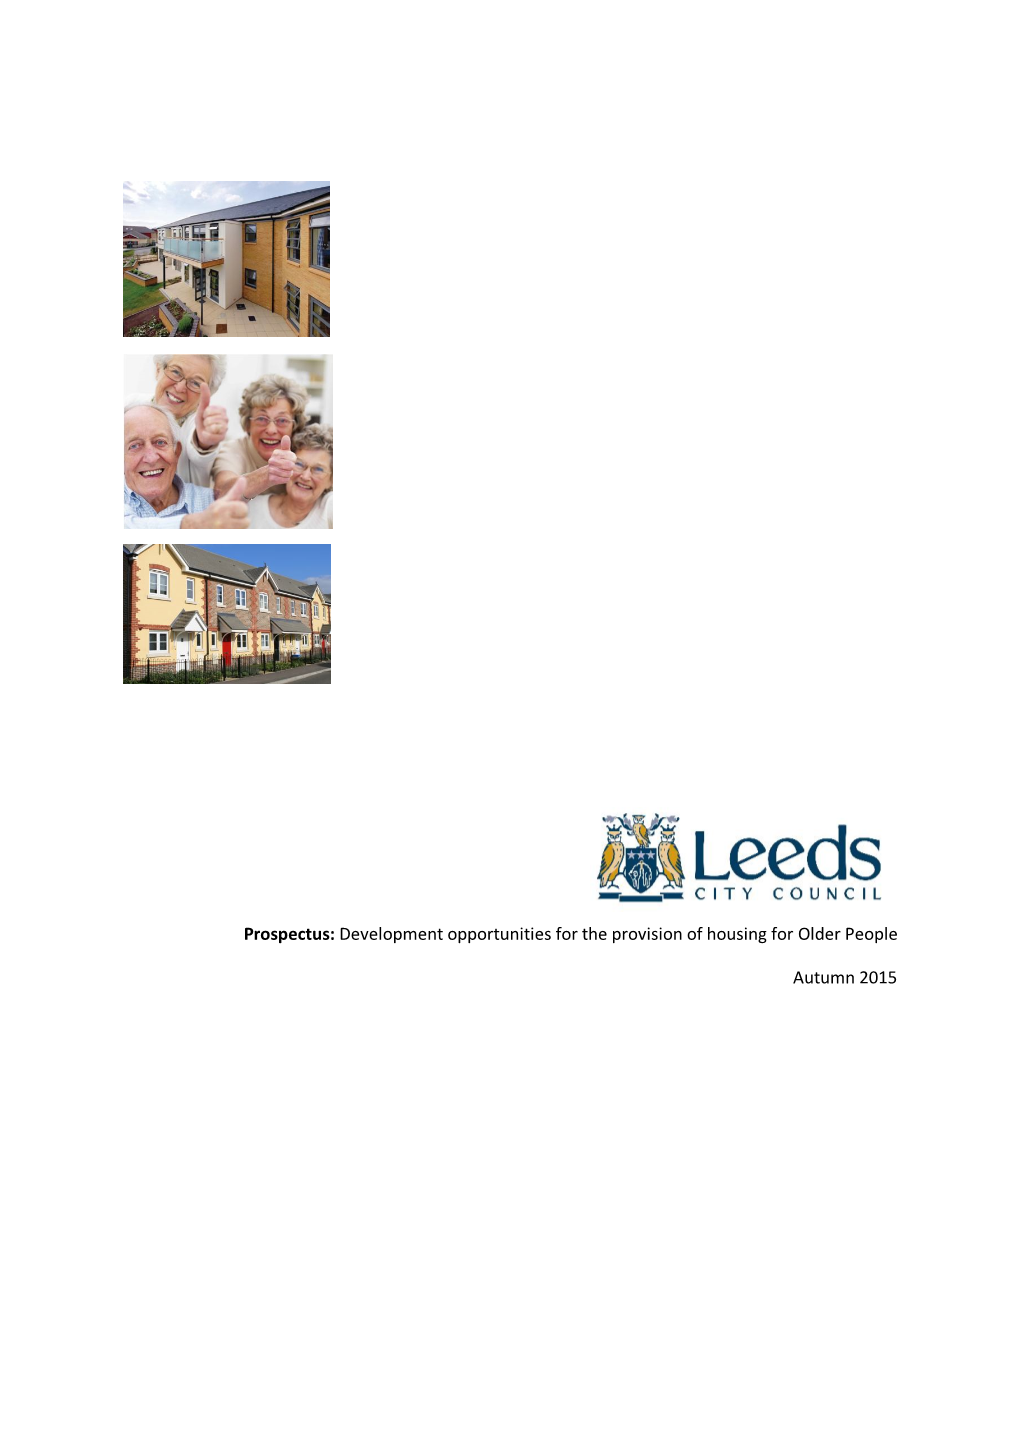 Prospectus: Development Opportunities for the Provision of Housing for Older People Autumn 2015